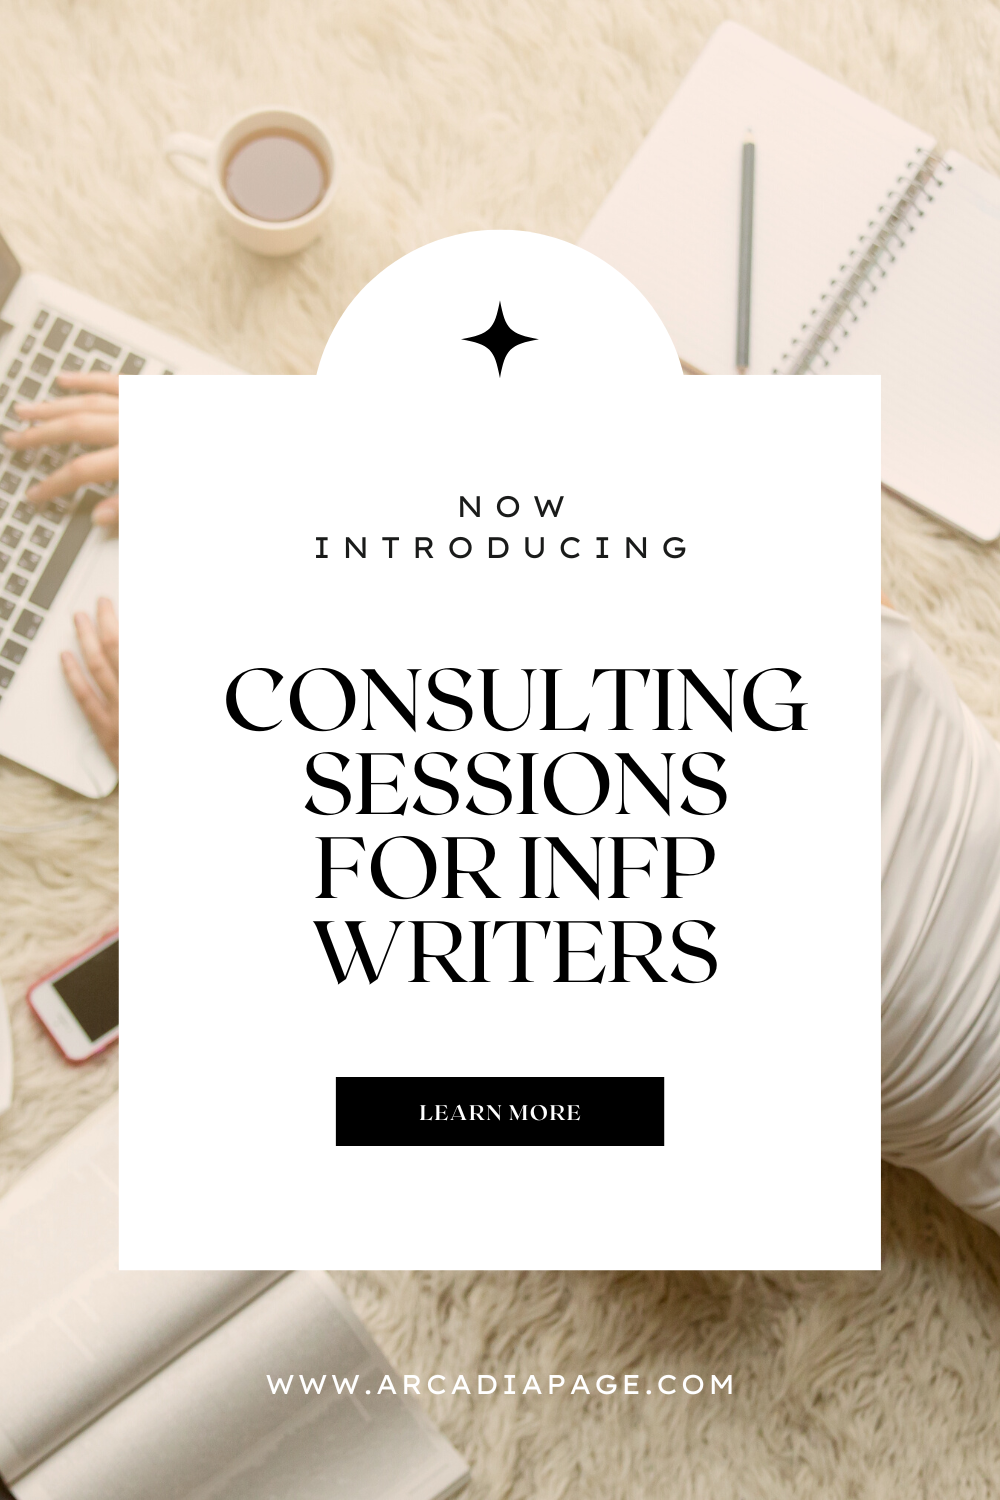 Consulting sessions for INFP writers, INFP Writing, INFP Writing Style